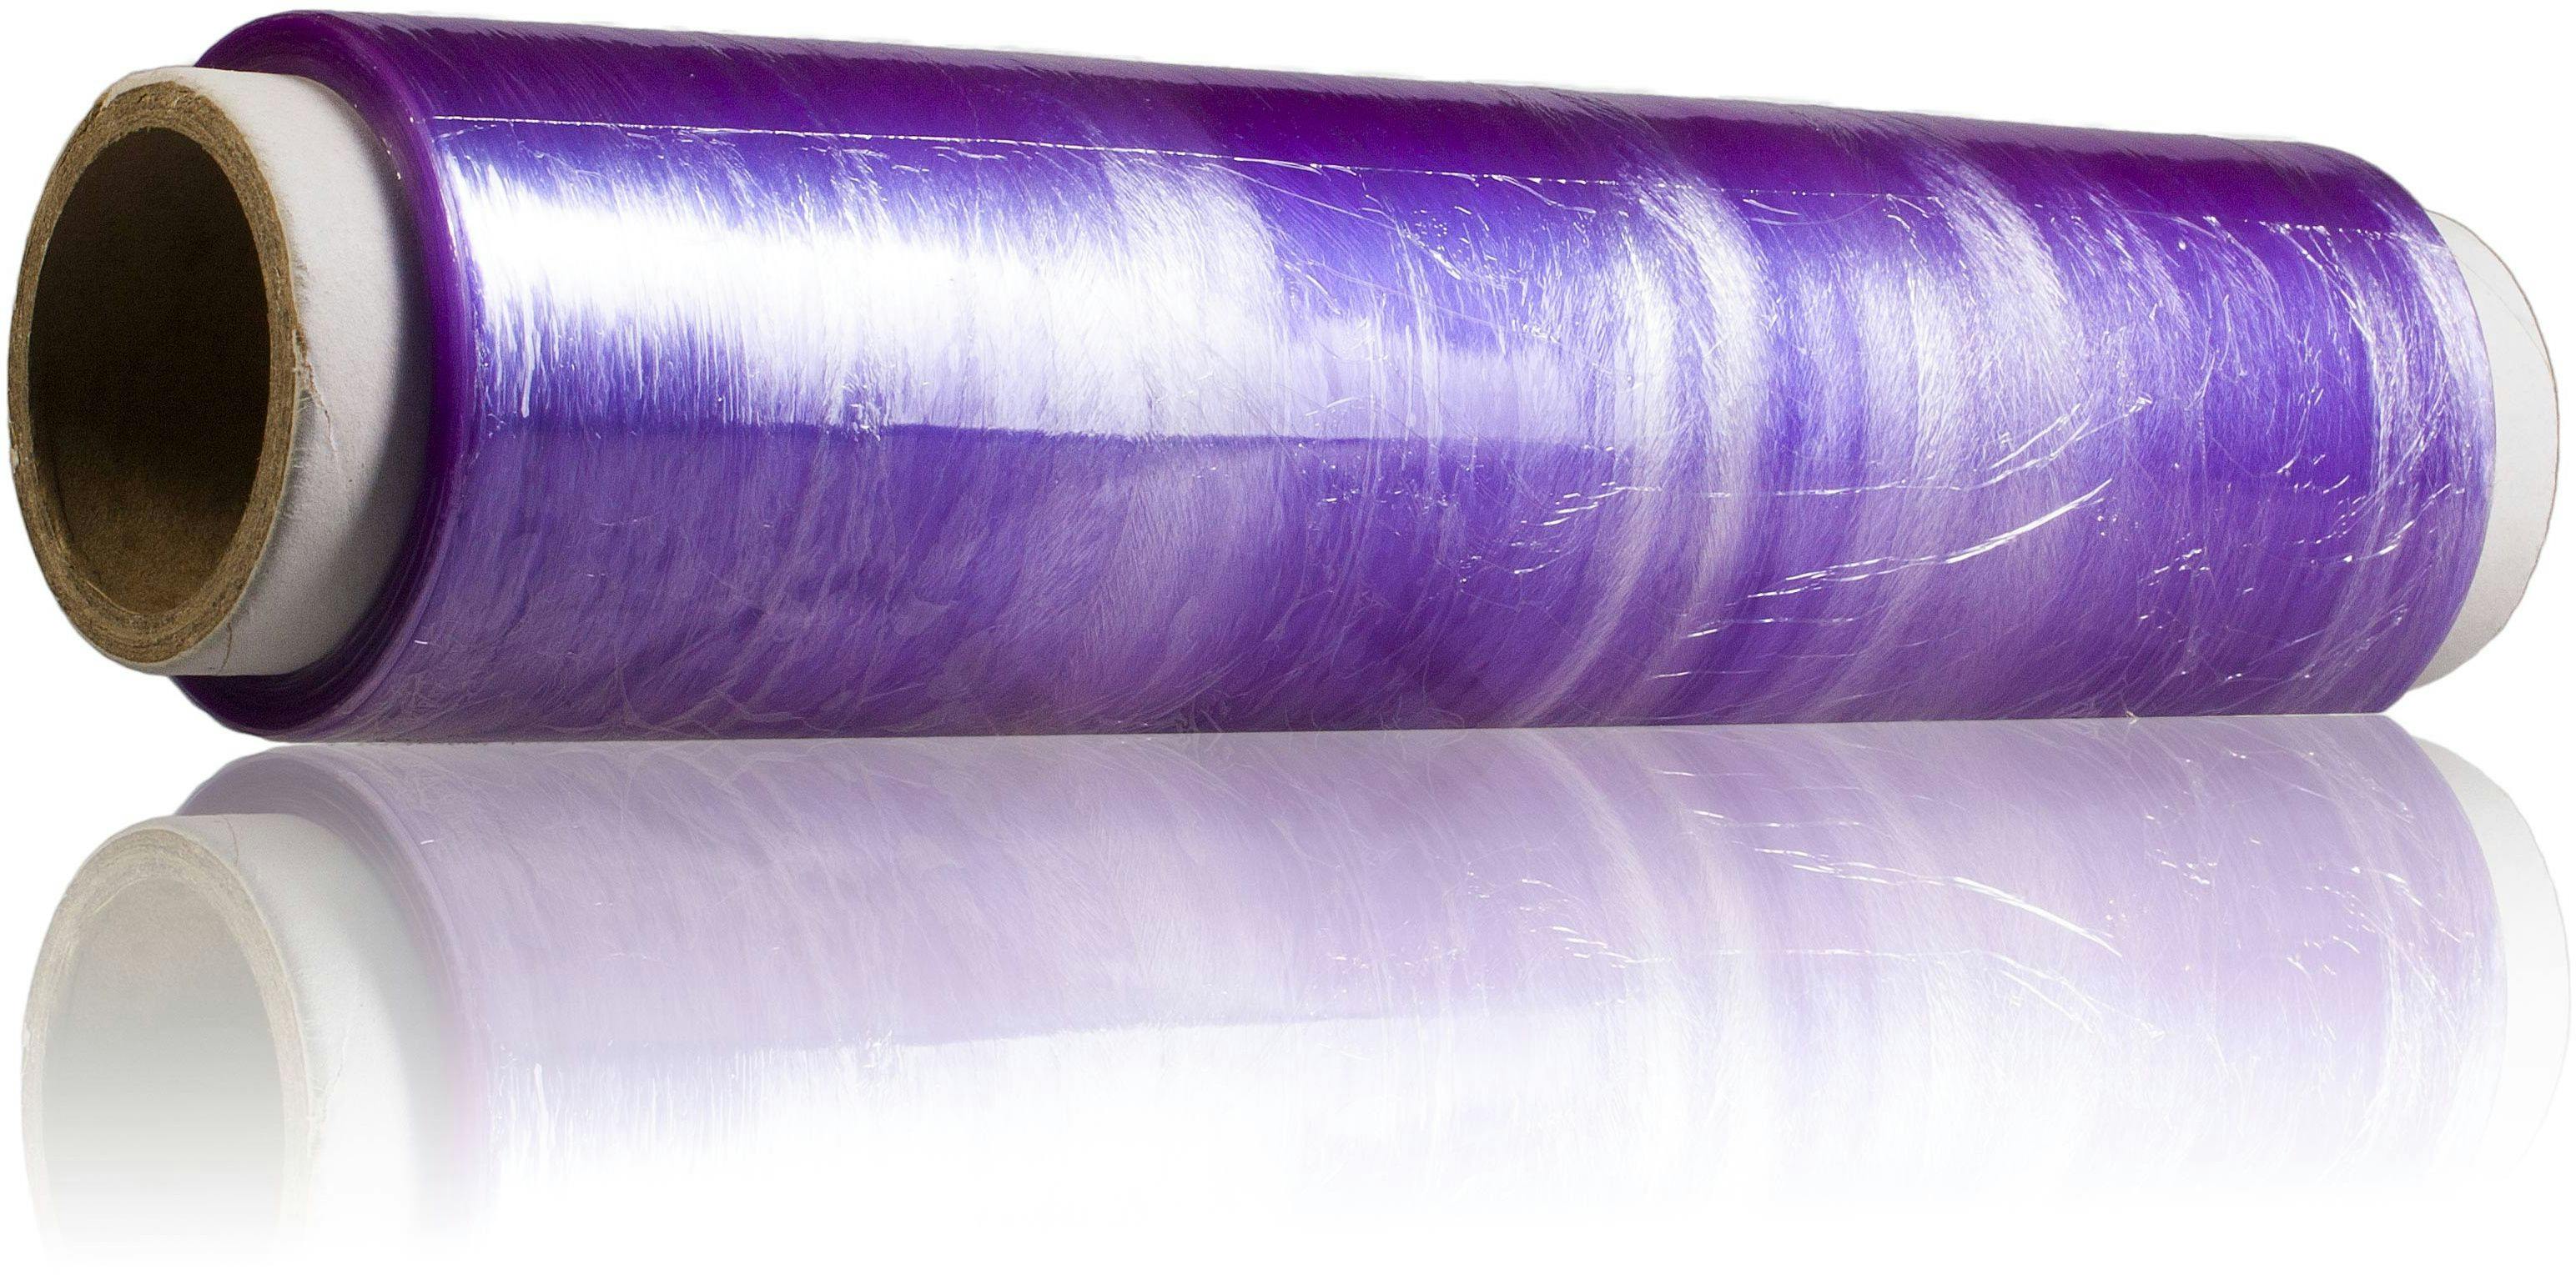 Stretchable cling film